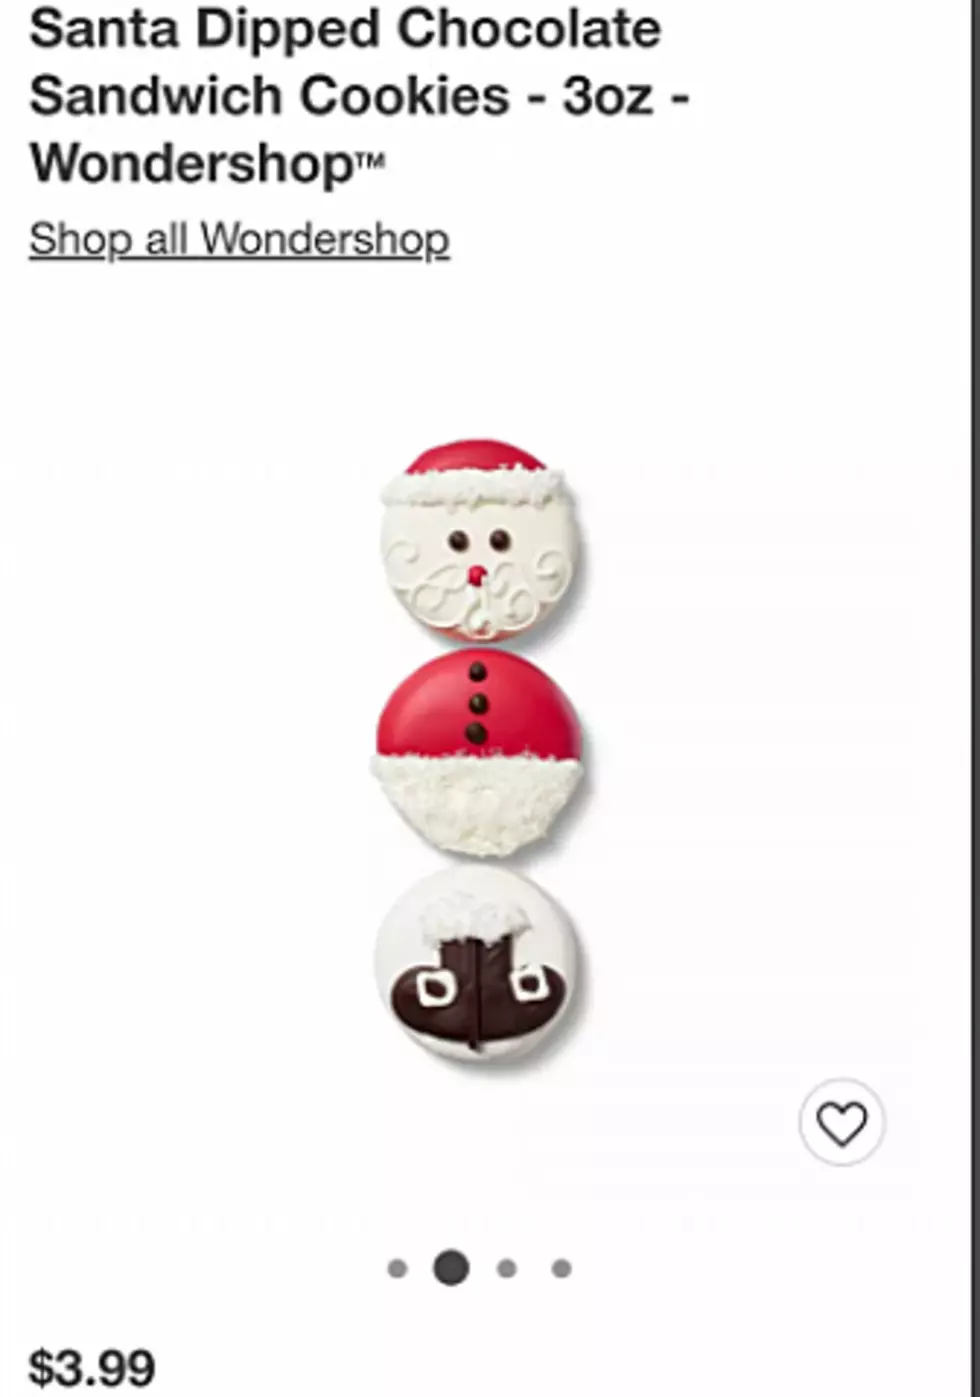 Target Selling Cookies&#8211; Supposed to be Boots